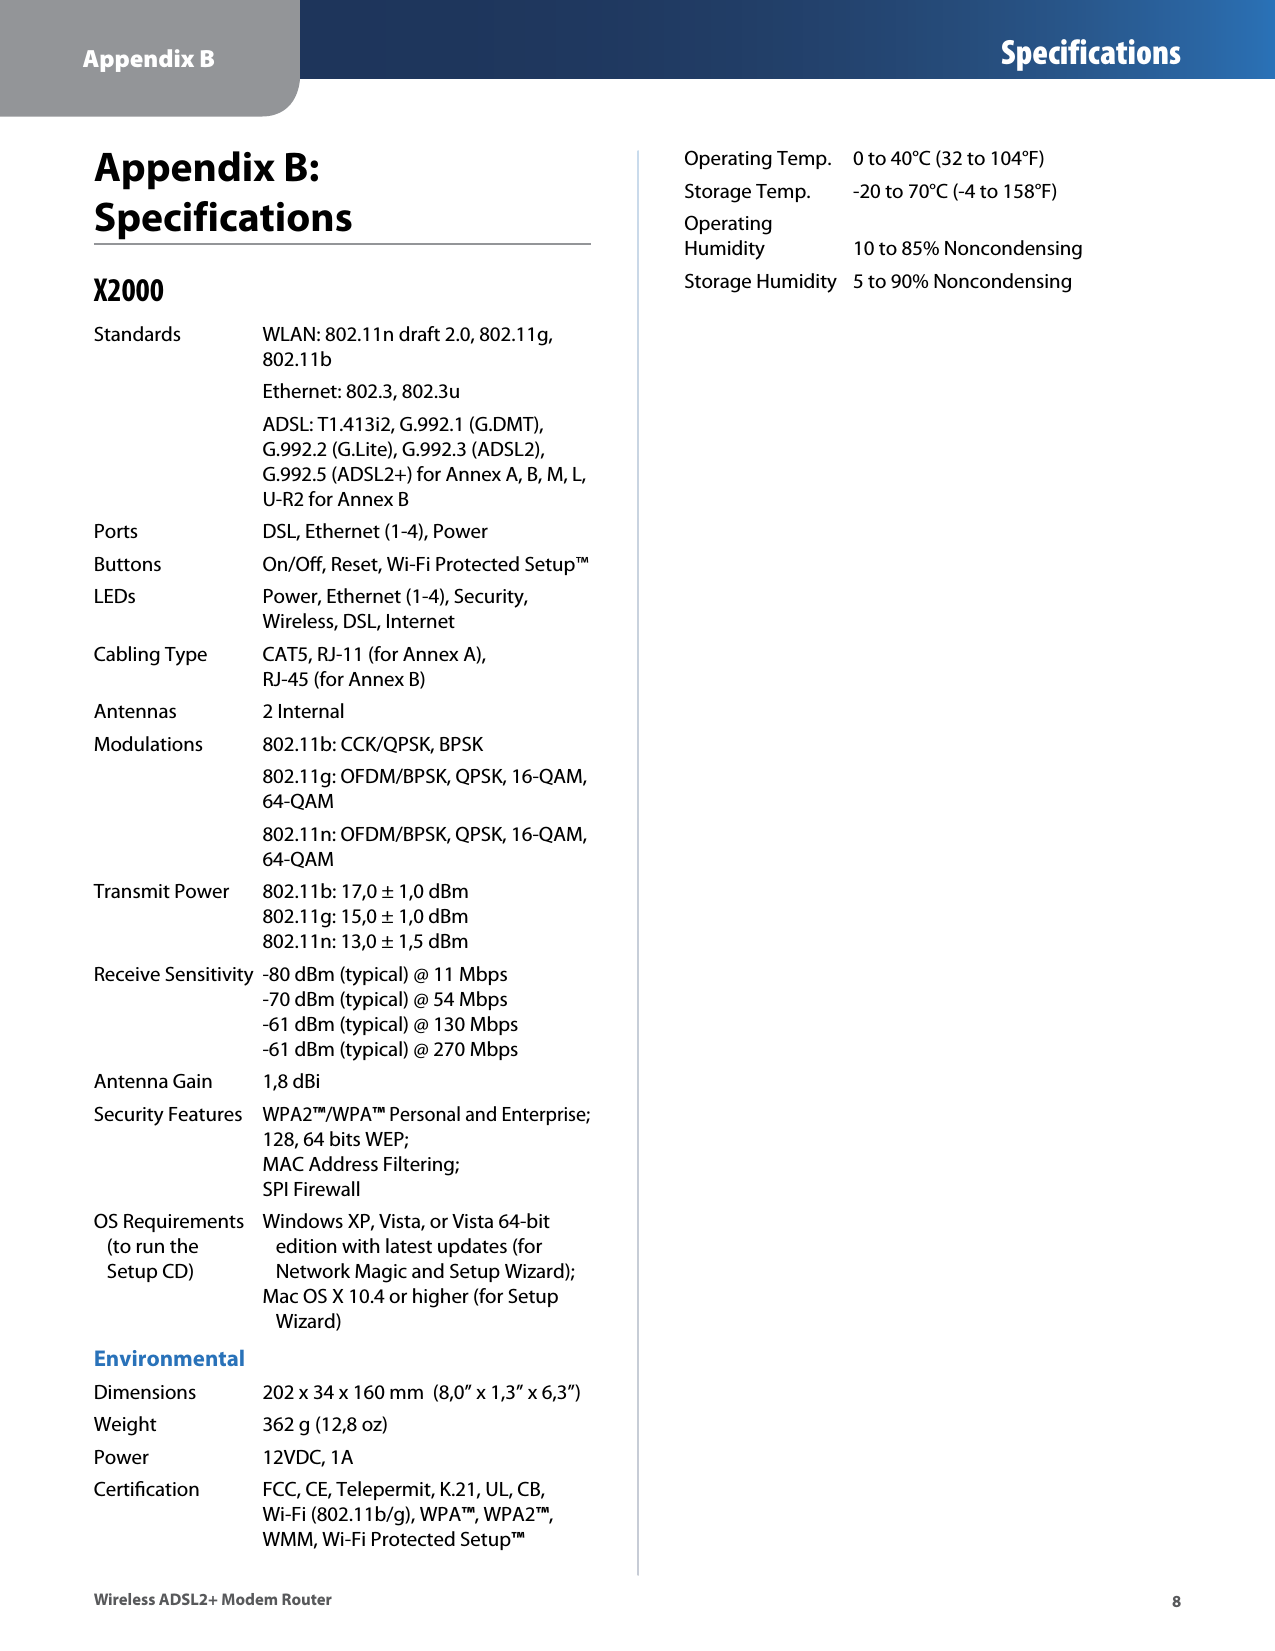 Appendix B Specifications8Wireless ADSL2+ Modem RouterAppendix B:  SpecificationsX2000Standards  WLAN: 802.11n draft 2.0, 802.11g,    802.11b  Ethernet: 802.3, 802.3u  ADSL: T1.413i2, G.992.1 (G.DMT),    G.992.2 (G.Lite), G.992.3 (ADSL2),    G.992.5 (ADSL2+) for Annex A, B, M, L,    U-R2 for Annex BPorts  DSL, Ethernet (1-4), PowerButtons  On/Oﬀ, Reset, Wi-Fi Protected Setup™LEDs  Power, Ethernet (1-4), Security,    Wireless, DSL, InternetCabling Type  CAT5, RJ-11 (for Annex A),    RJ-45 (for Annex B)Antennas  2 InternalModulations  802.11b: CCK/QPSK, BPSK  802.11g: OFDM/BPSK, QPSK, 16-QAM,    64-QAM  802.11n: OFDM/BPSK, QPSK, 16-QAM,    64-QAMTransmit Power  802.11b: 17,0 ± 1,0 dBm   802.11g: 15,0 ± 1,0 dBm   802.11n: 13,0 ± 1,5 dBmReceive Sensitivity  -80 dBm (typical) @ 11 Mbps   -70 dBm (typical) @ 54 Mbps   -61 dBm (typical) @ 130 Mbps   -61 dBm (typical) @ 270 MbpsAntenna Gain  1,8 dBiSecurity Features WPA2™/WPA™ Personal and Enterprise;  128, 64 bits WEP;   MAC Address Filtering;   SPI FirewallOS Requirements  Windows XP, Vista, or Vista 64-bit     (to run the     edition with latest updates (for     Setup CD)     Network Magic and Setup Wizard);   Mac OS X 10.4 or higher (for Setup       Wizard)EnvironmentalDimensions  202 x 34 x 160 mm  (8,0” x 1,3” x 6,3”)Weight  362 g (12,8 oz)Power  12VDC, 1ACertiﬁcation  FCC, CE, Telepermit, K.21, UL, CB,    Wi-Fi (802.11b/g), WPA™, WPA2™,   WMM, Wi-Fi Protected Setup™Operating Temp.  0 to 40°C (32 to 104°F)Storage Temp.  -20 to 70°C (-4 to 158°F)Operating Humidity  10 to 85% NoncondensingStorage Humidity  5 to 90% Noncondensing